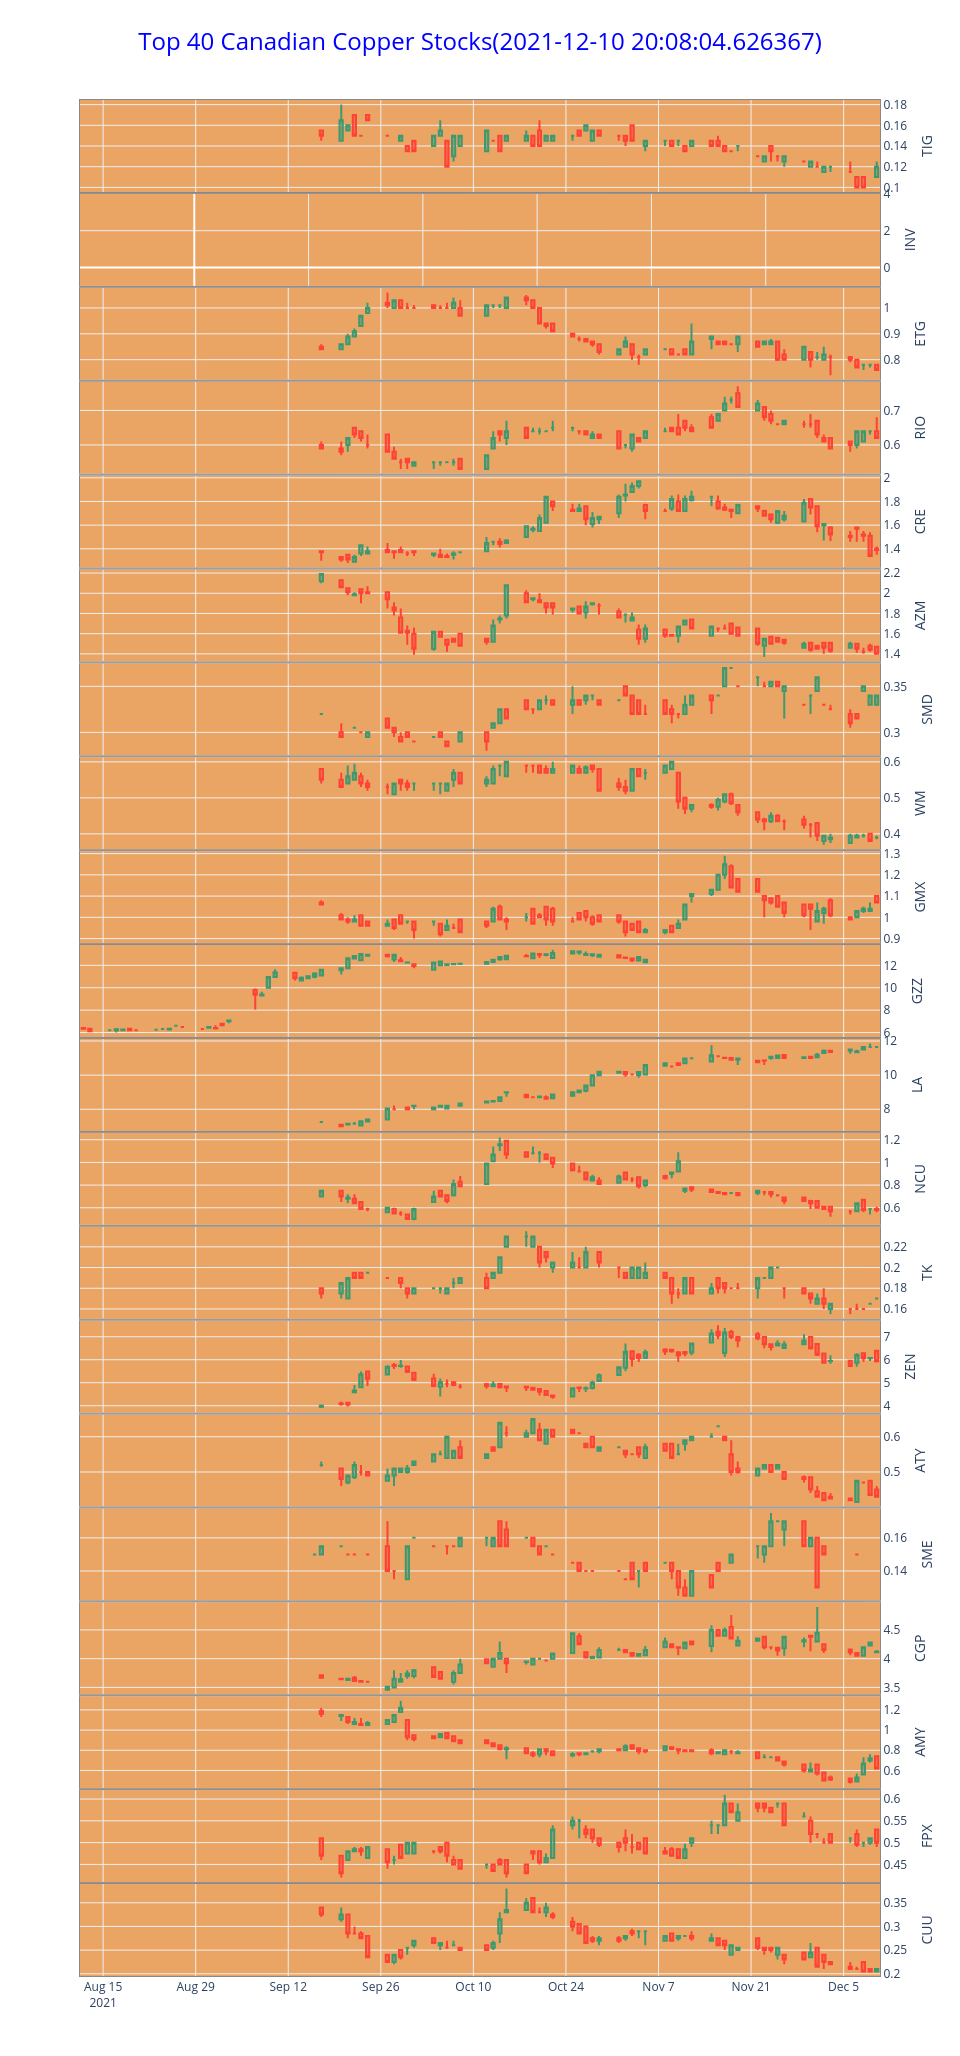 Top 40 Canadian Copper Stocks(2021-12-10 20:08:04.626367) | candlestick made by Ziwang | plotly